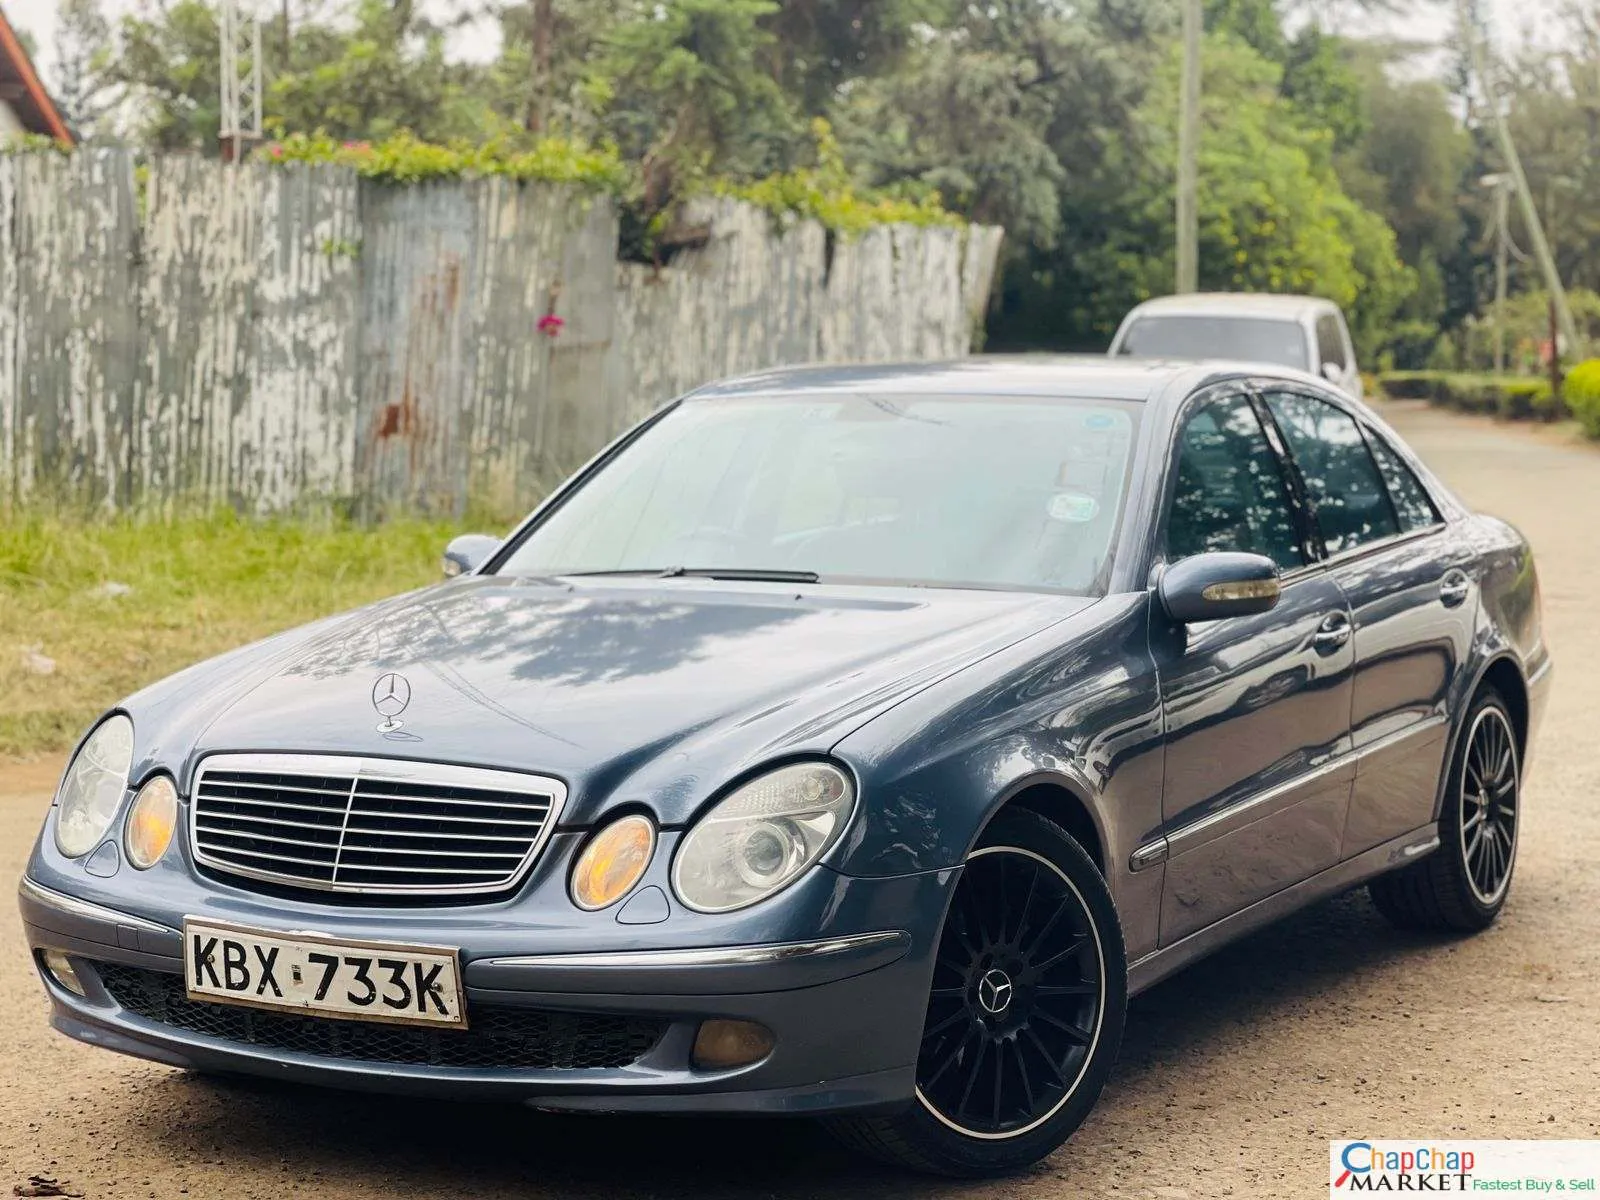 Mercedes Benz E200 kenya w211 QUICK SALE You Pay 30% DEPOSIT Trade in OK e200 for sale in kenya hire purchase installments EXCLUSIVE